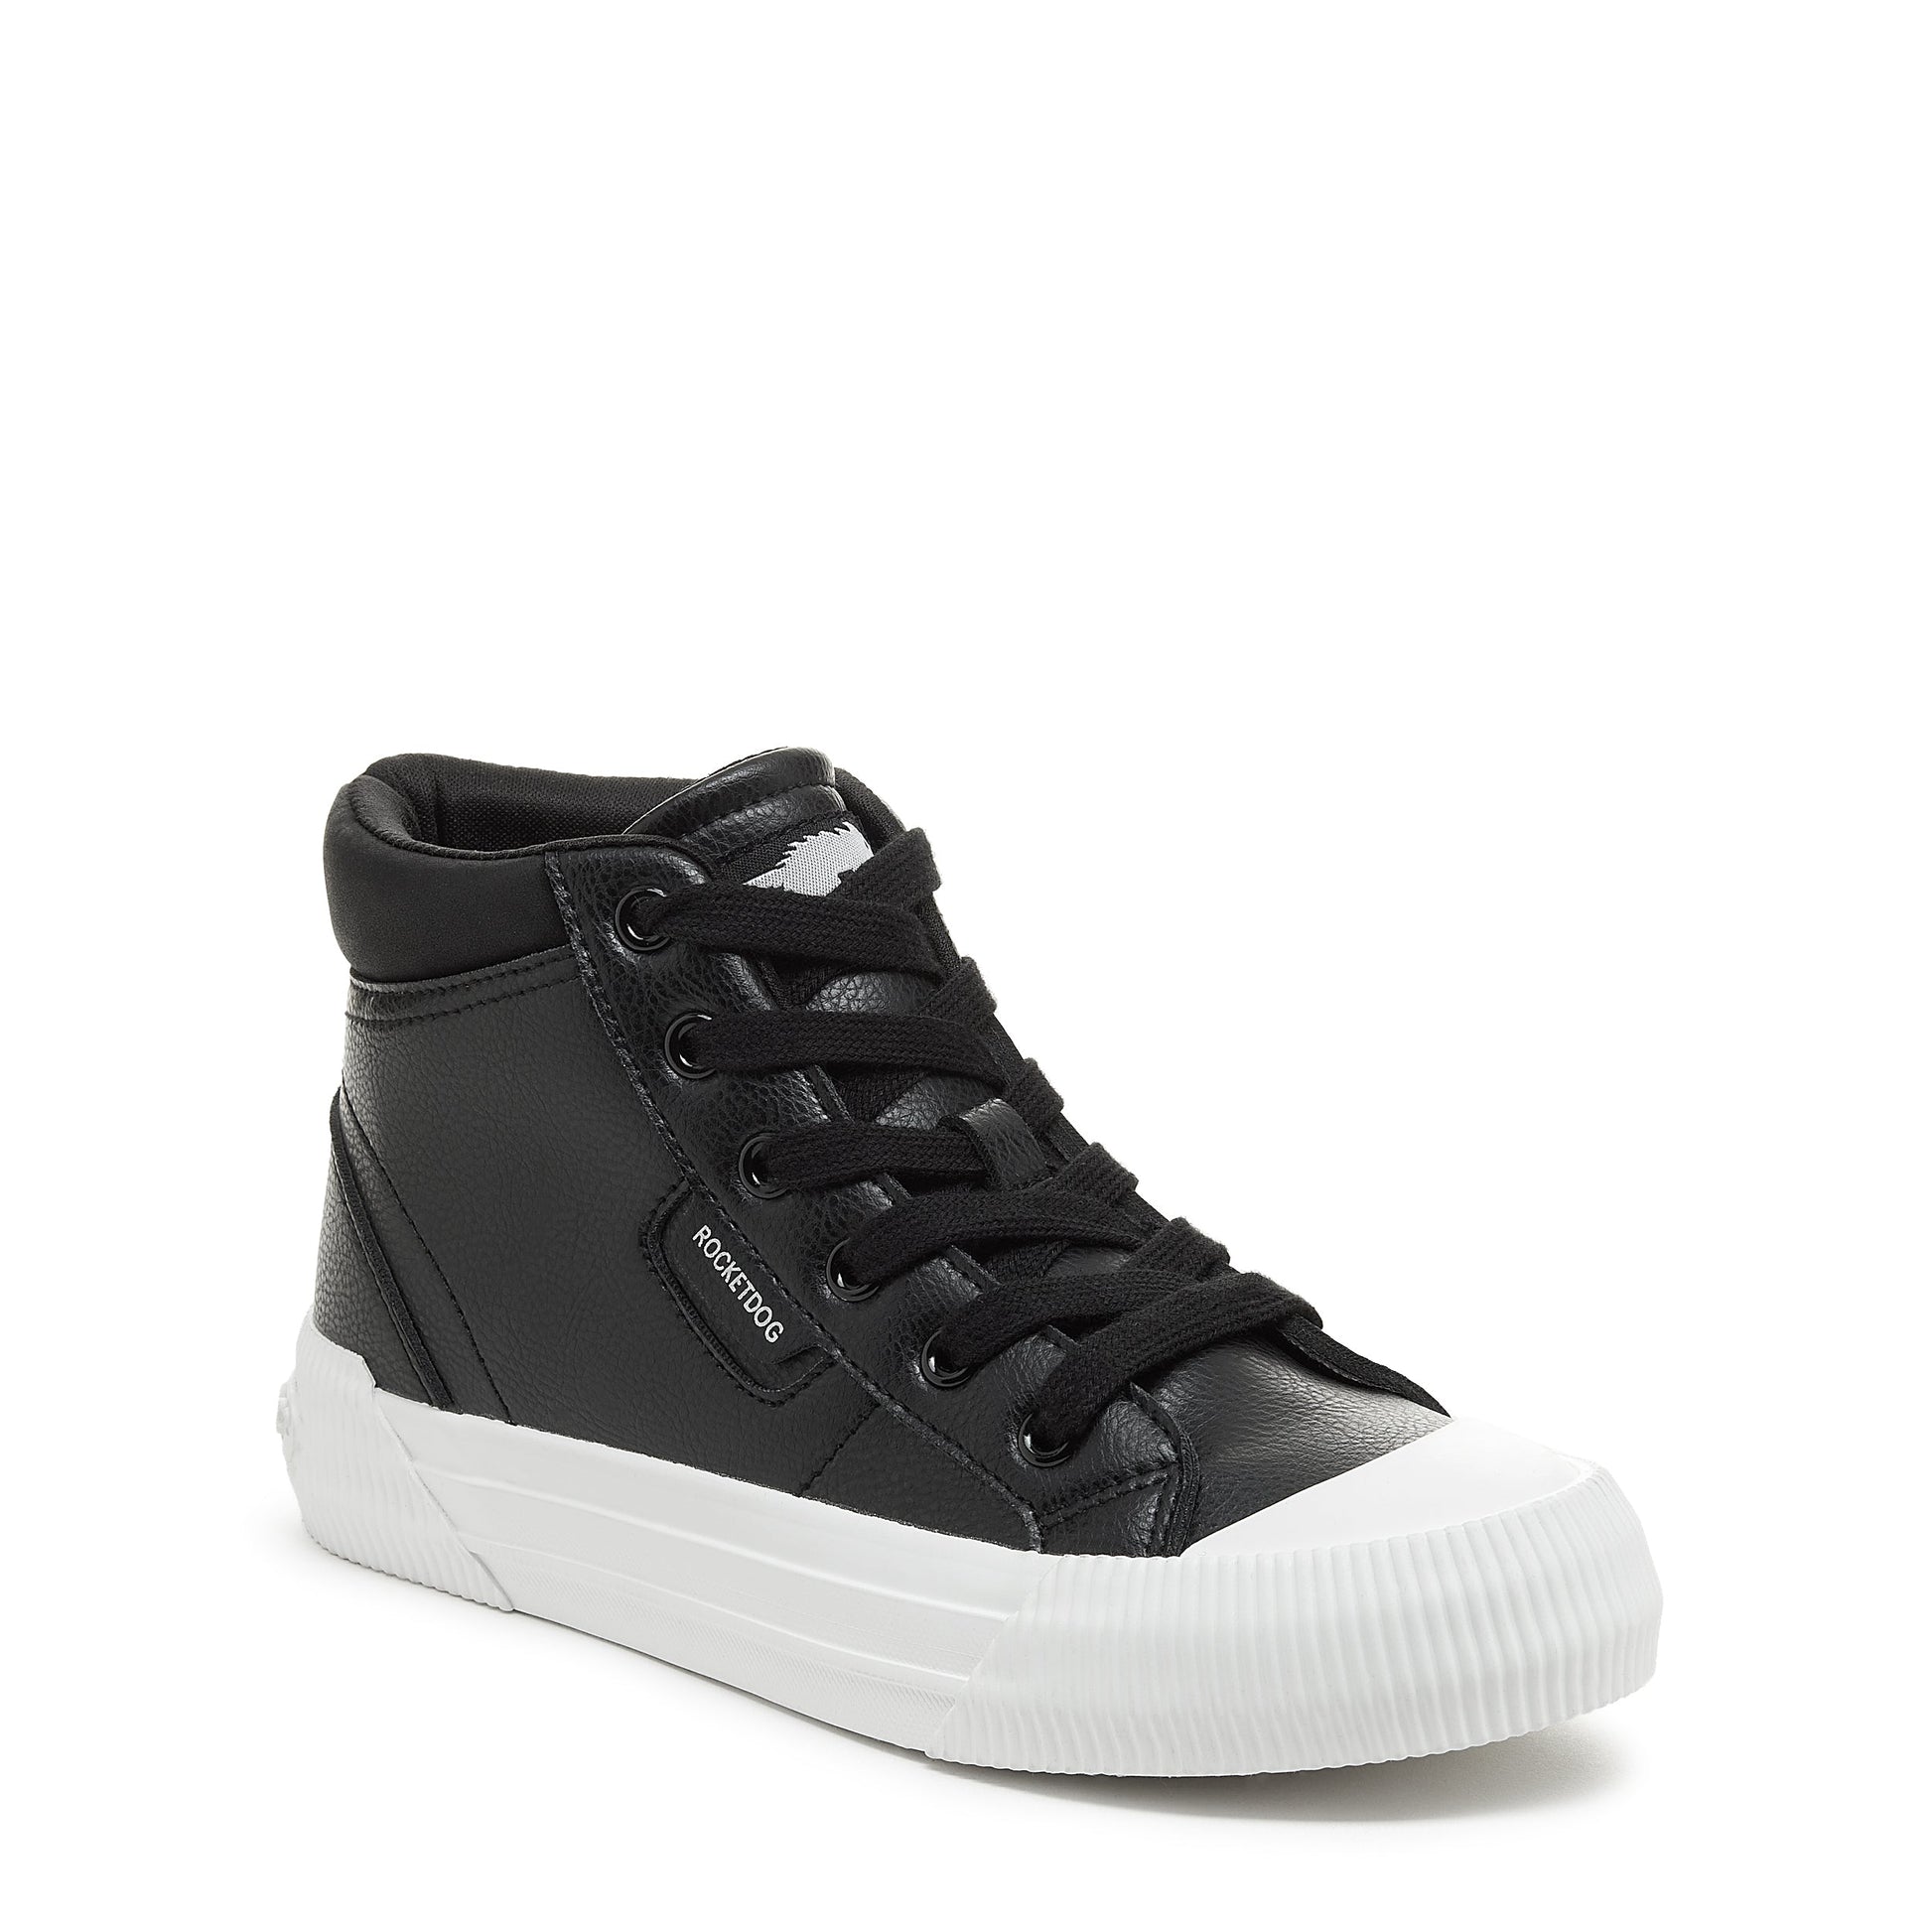 Cheery Black High Top Trainer